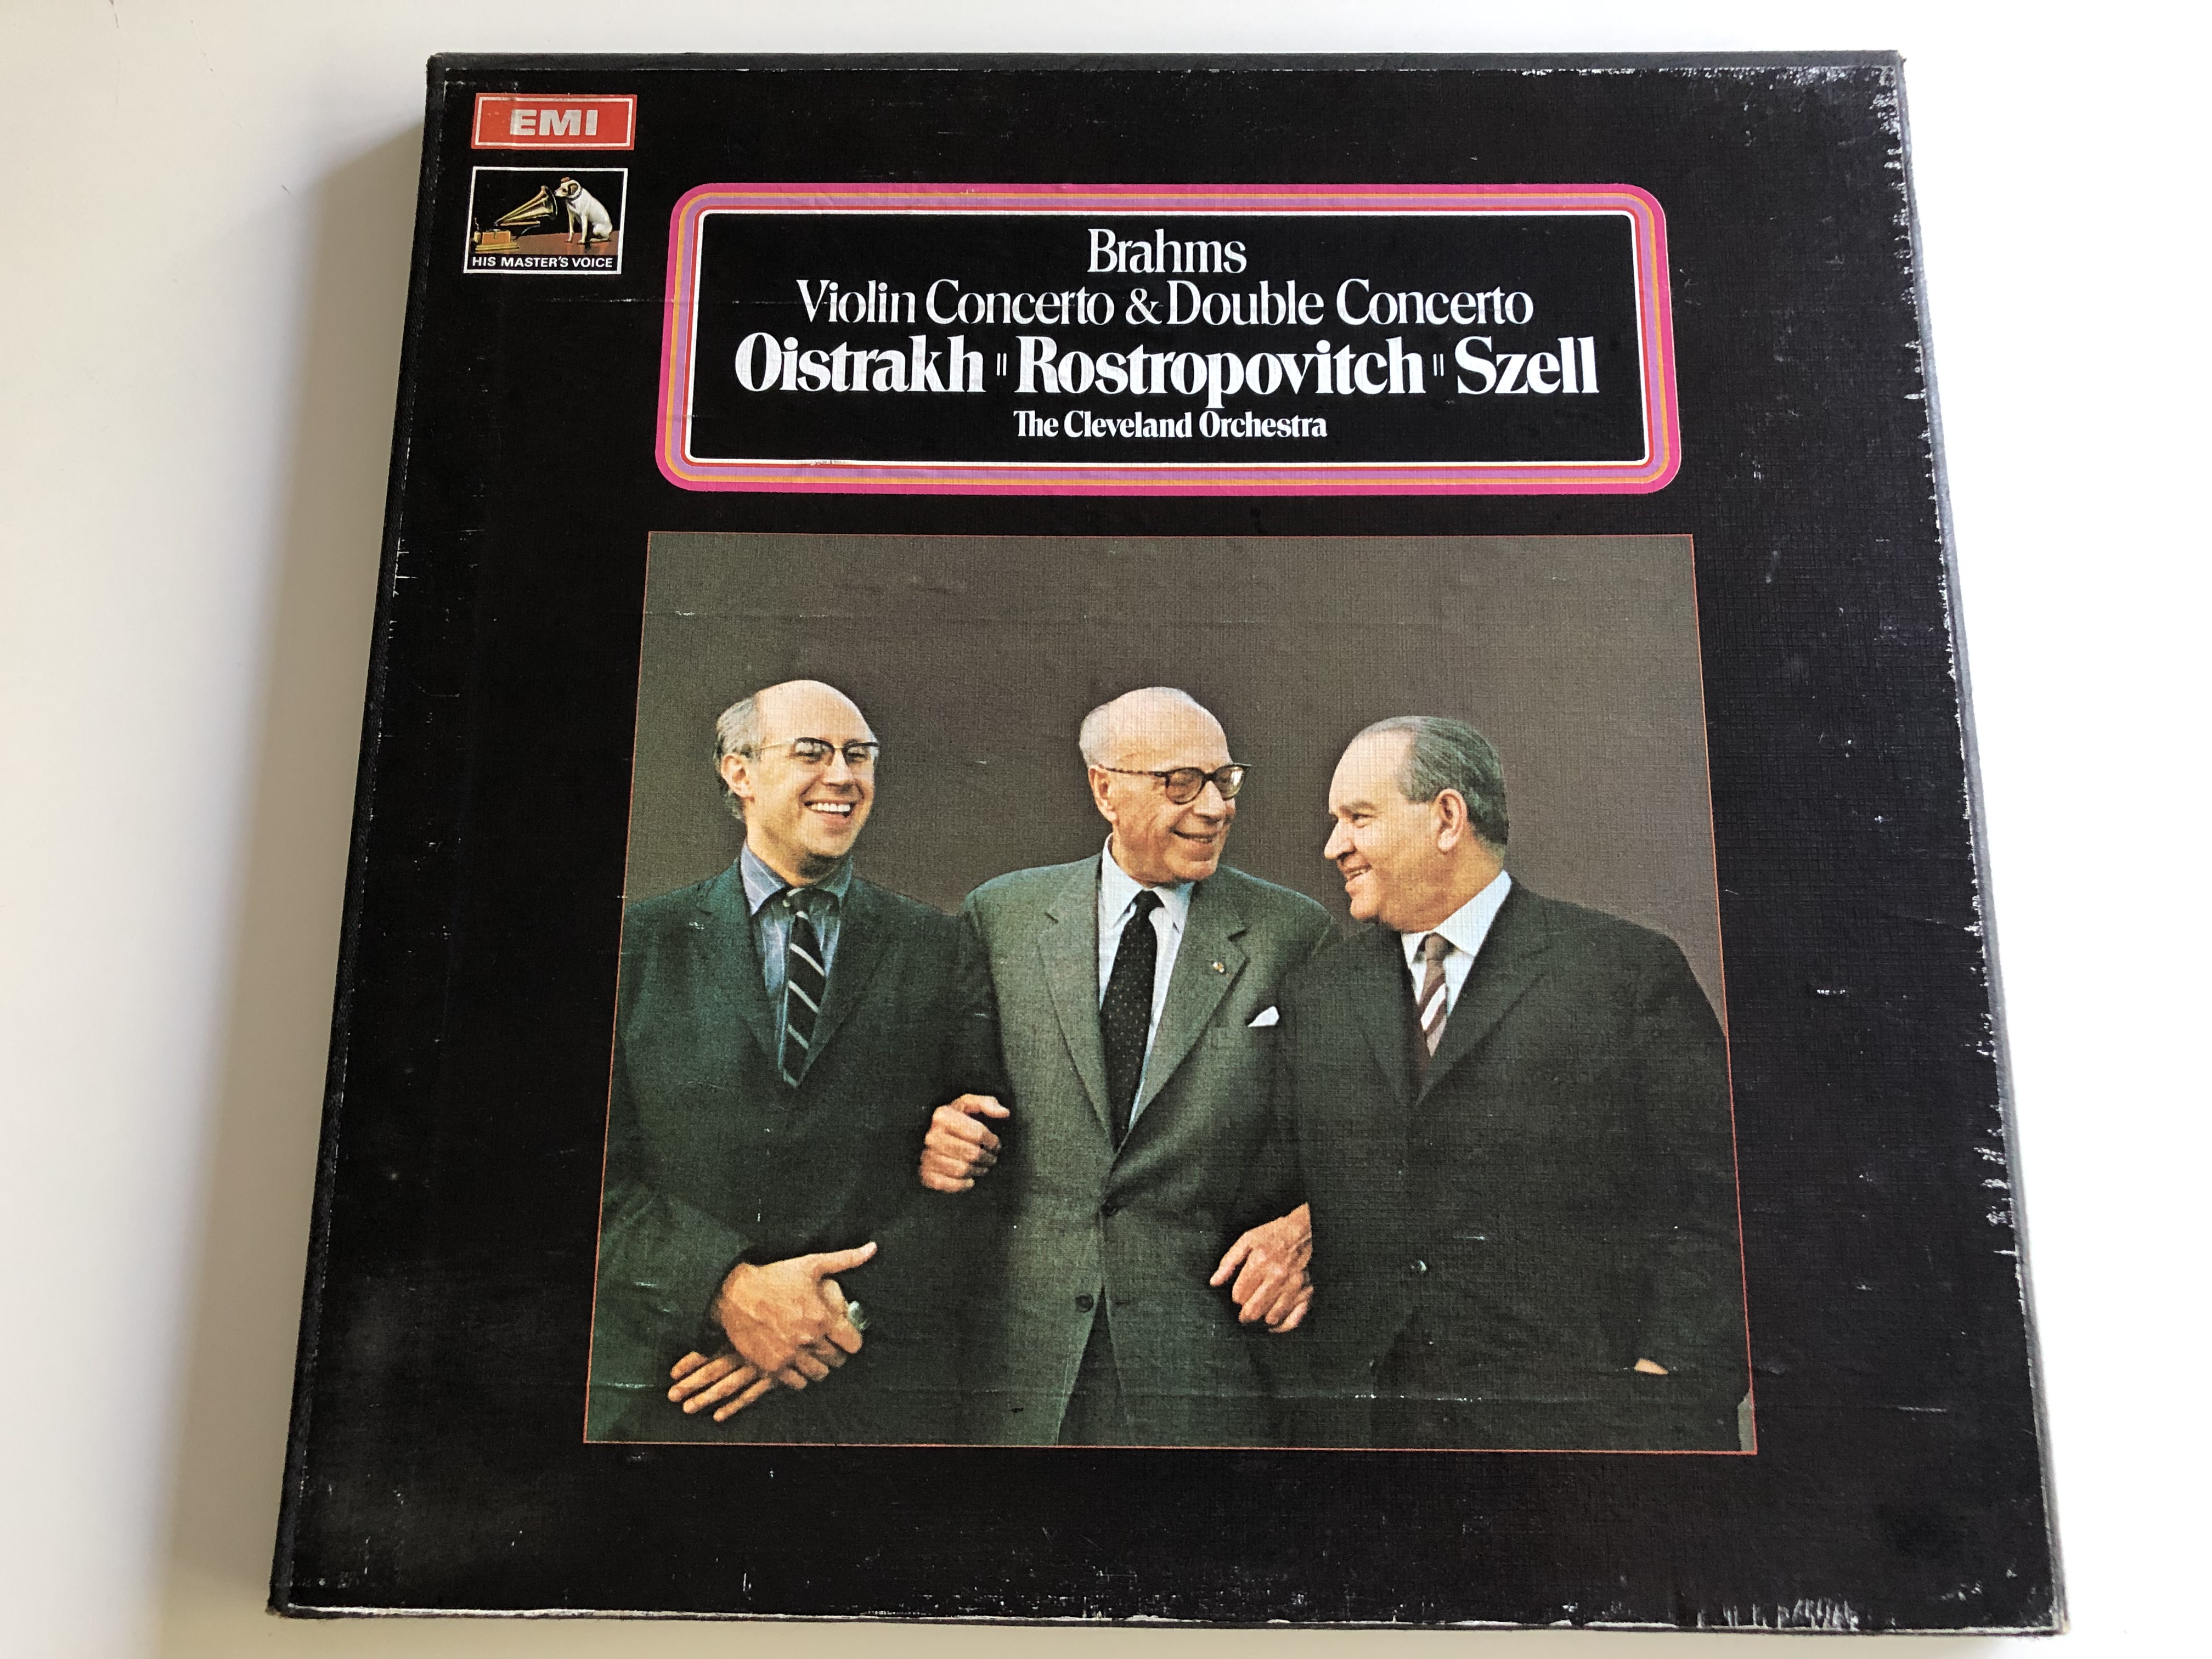 brahms-violin-concerto-double-concerto-oistrakh-rostropovich-szell-the-cleveland-orchestra-his-master-s-voice-2x-lp-stereo-sls-7862-1-.jpg